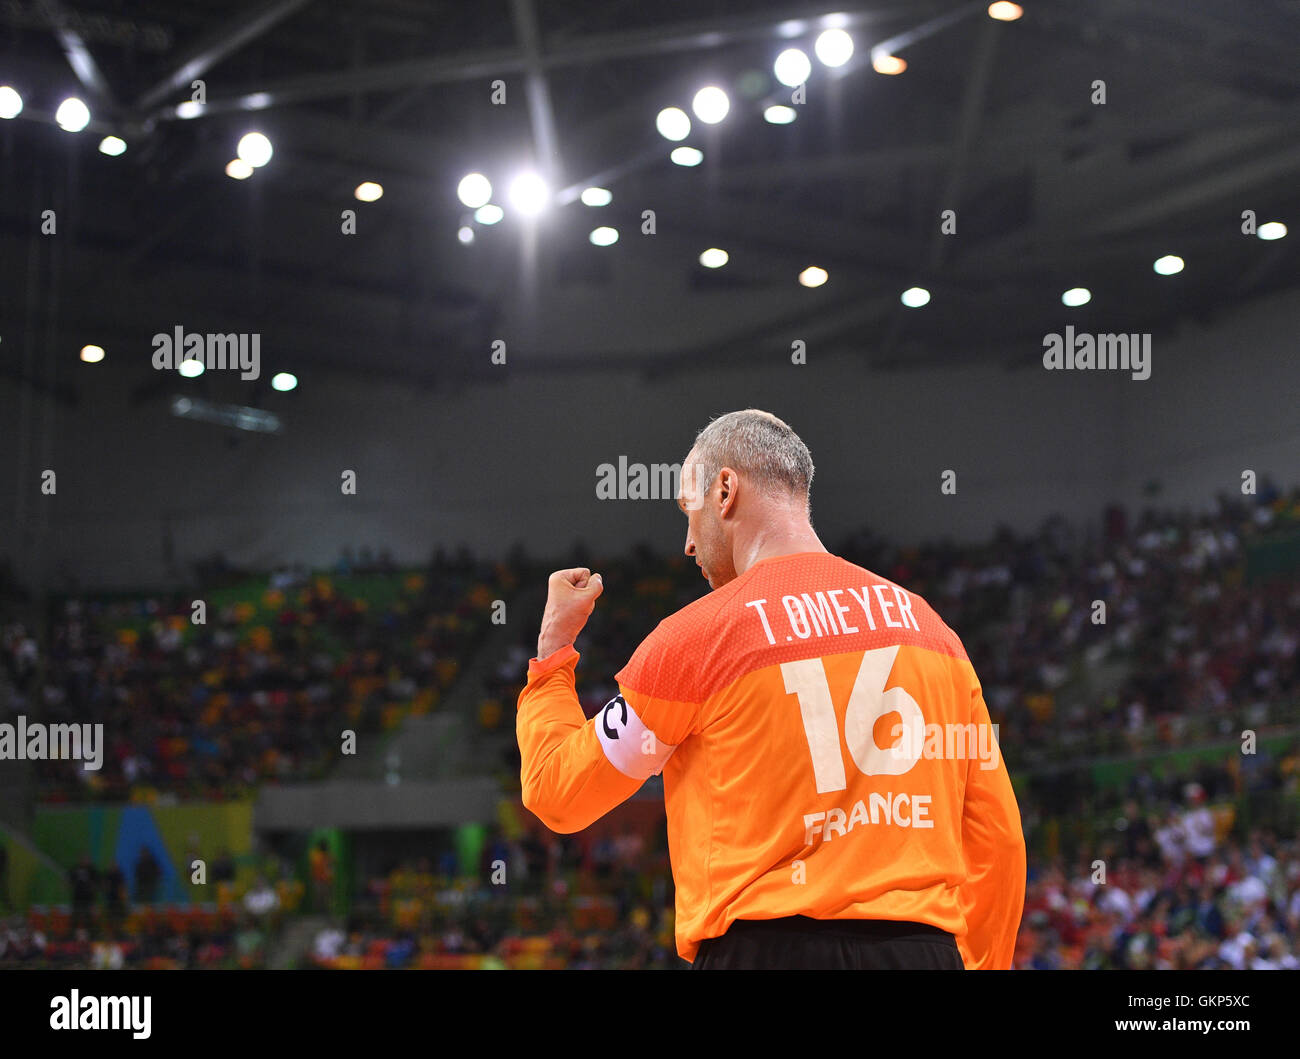 Rio de Janeiro, Brazil. 21st Aug, 2016. Goalkeeper Thierry Omeyer of France reacts during the Men's Gold Medal Match match between Denmark and France of the Handball events during the Rio 2016 Olympic Games in Rio de Janeiro, Brazil, 21 August 2016. Photo: Lukas Schulze/dpa/Alamy Live News Stock Photo